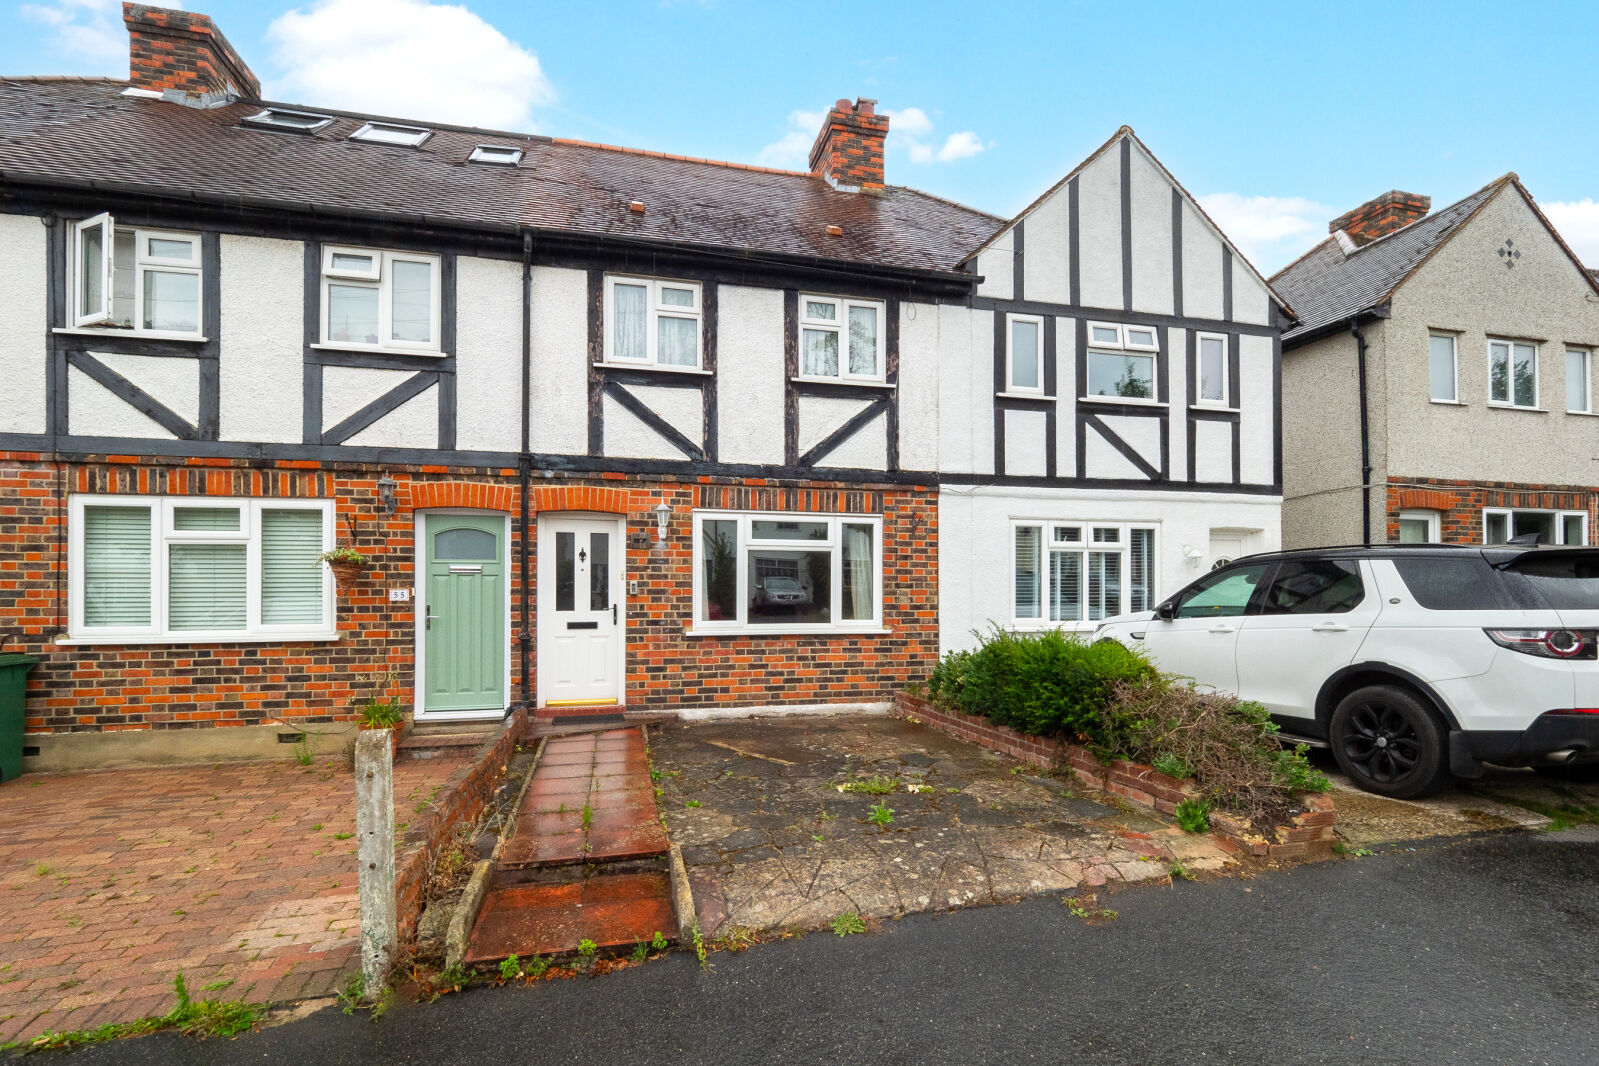 2 bedroom mid terraced house for sale Alberta Avenue, Cheam, SM1, main image